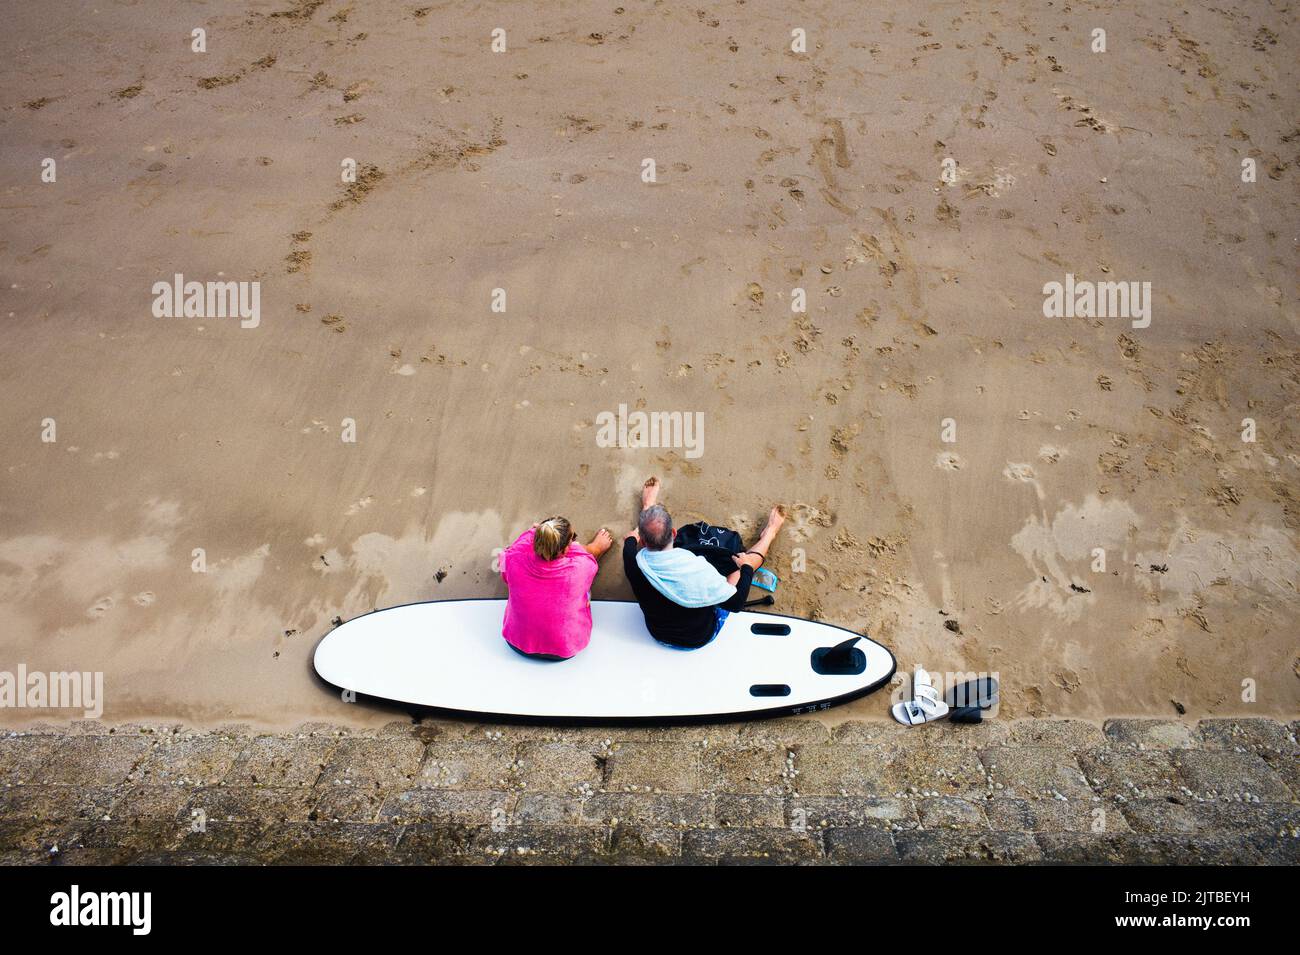 Looking down on an older couple sitting on a surfboard on a sandy beach Stock Photo